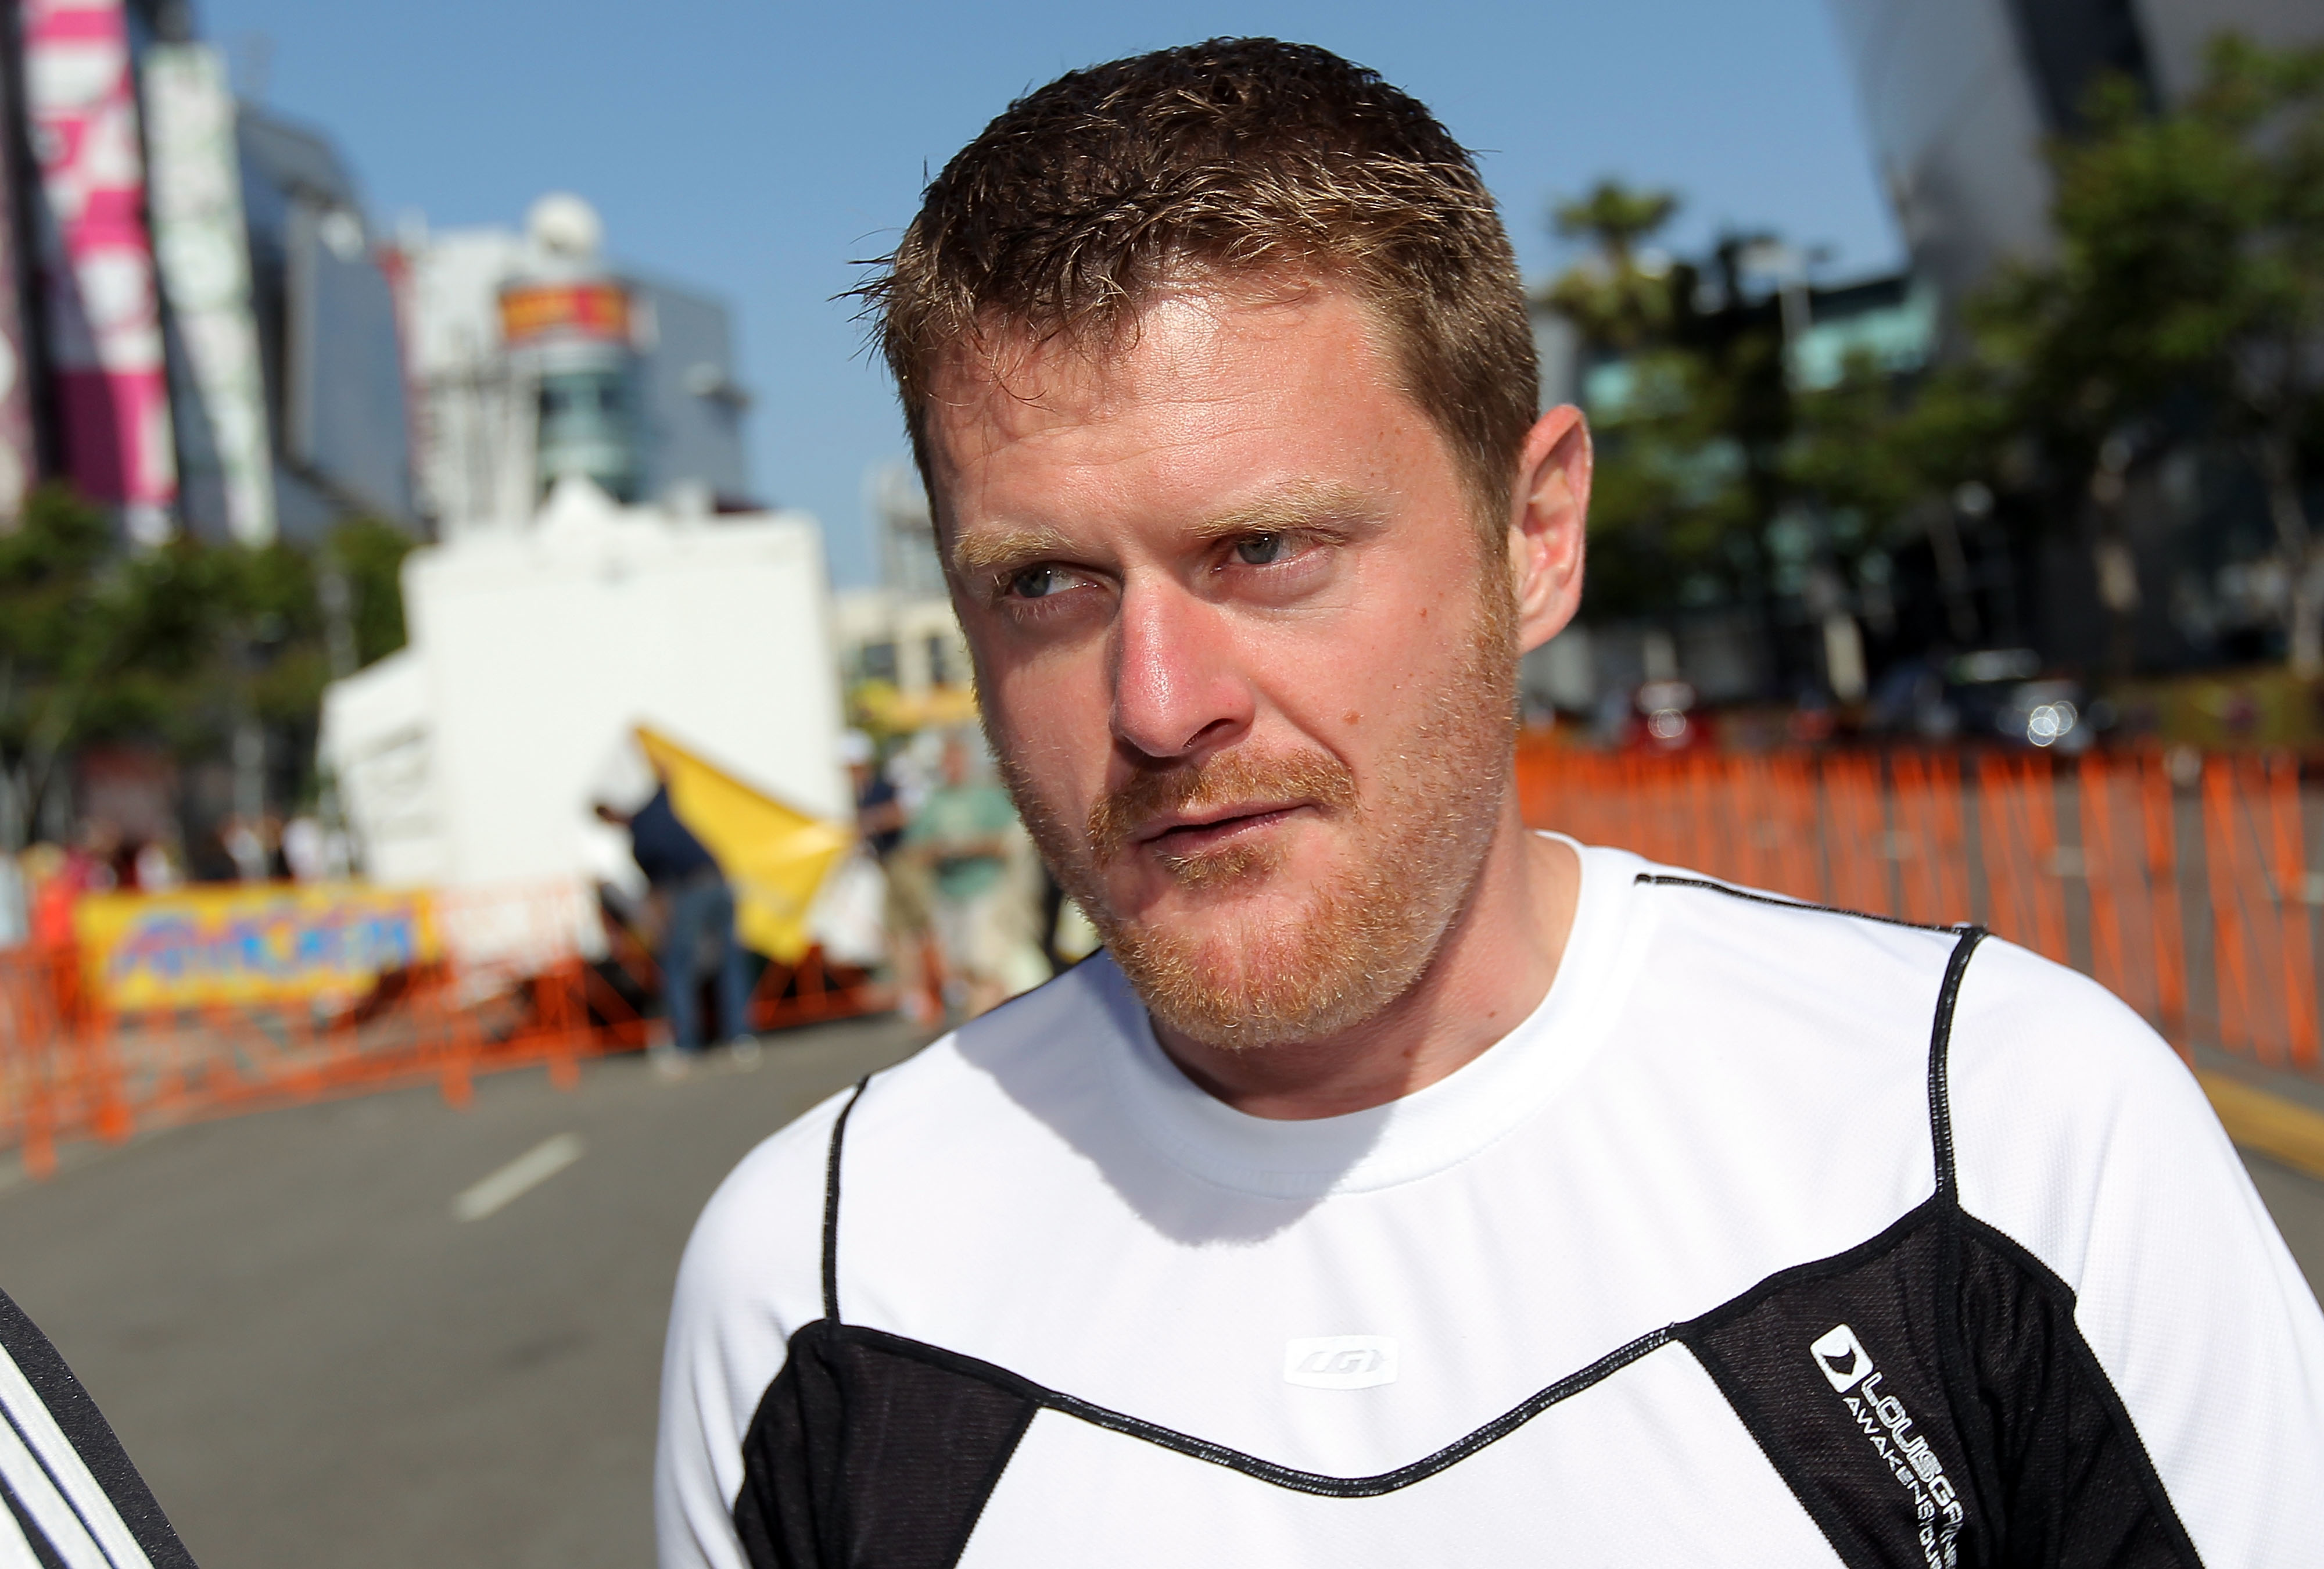 LOS ANGELES, CA - MAY 22:  Floyd Landis looks on as he attends Stage Seven of the 2010 Tour of California on May 22, 2010 in Los Angeles, California.  (Photo by Doug Pensinger/Getty Images)